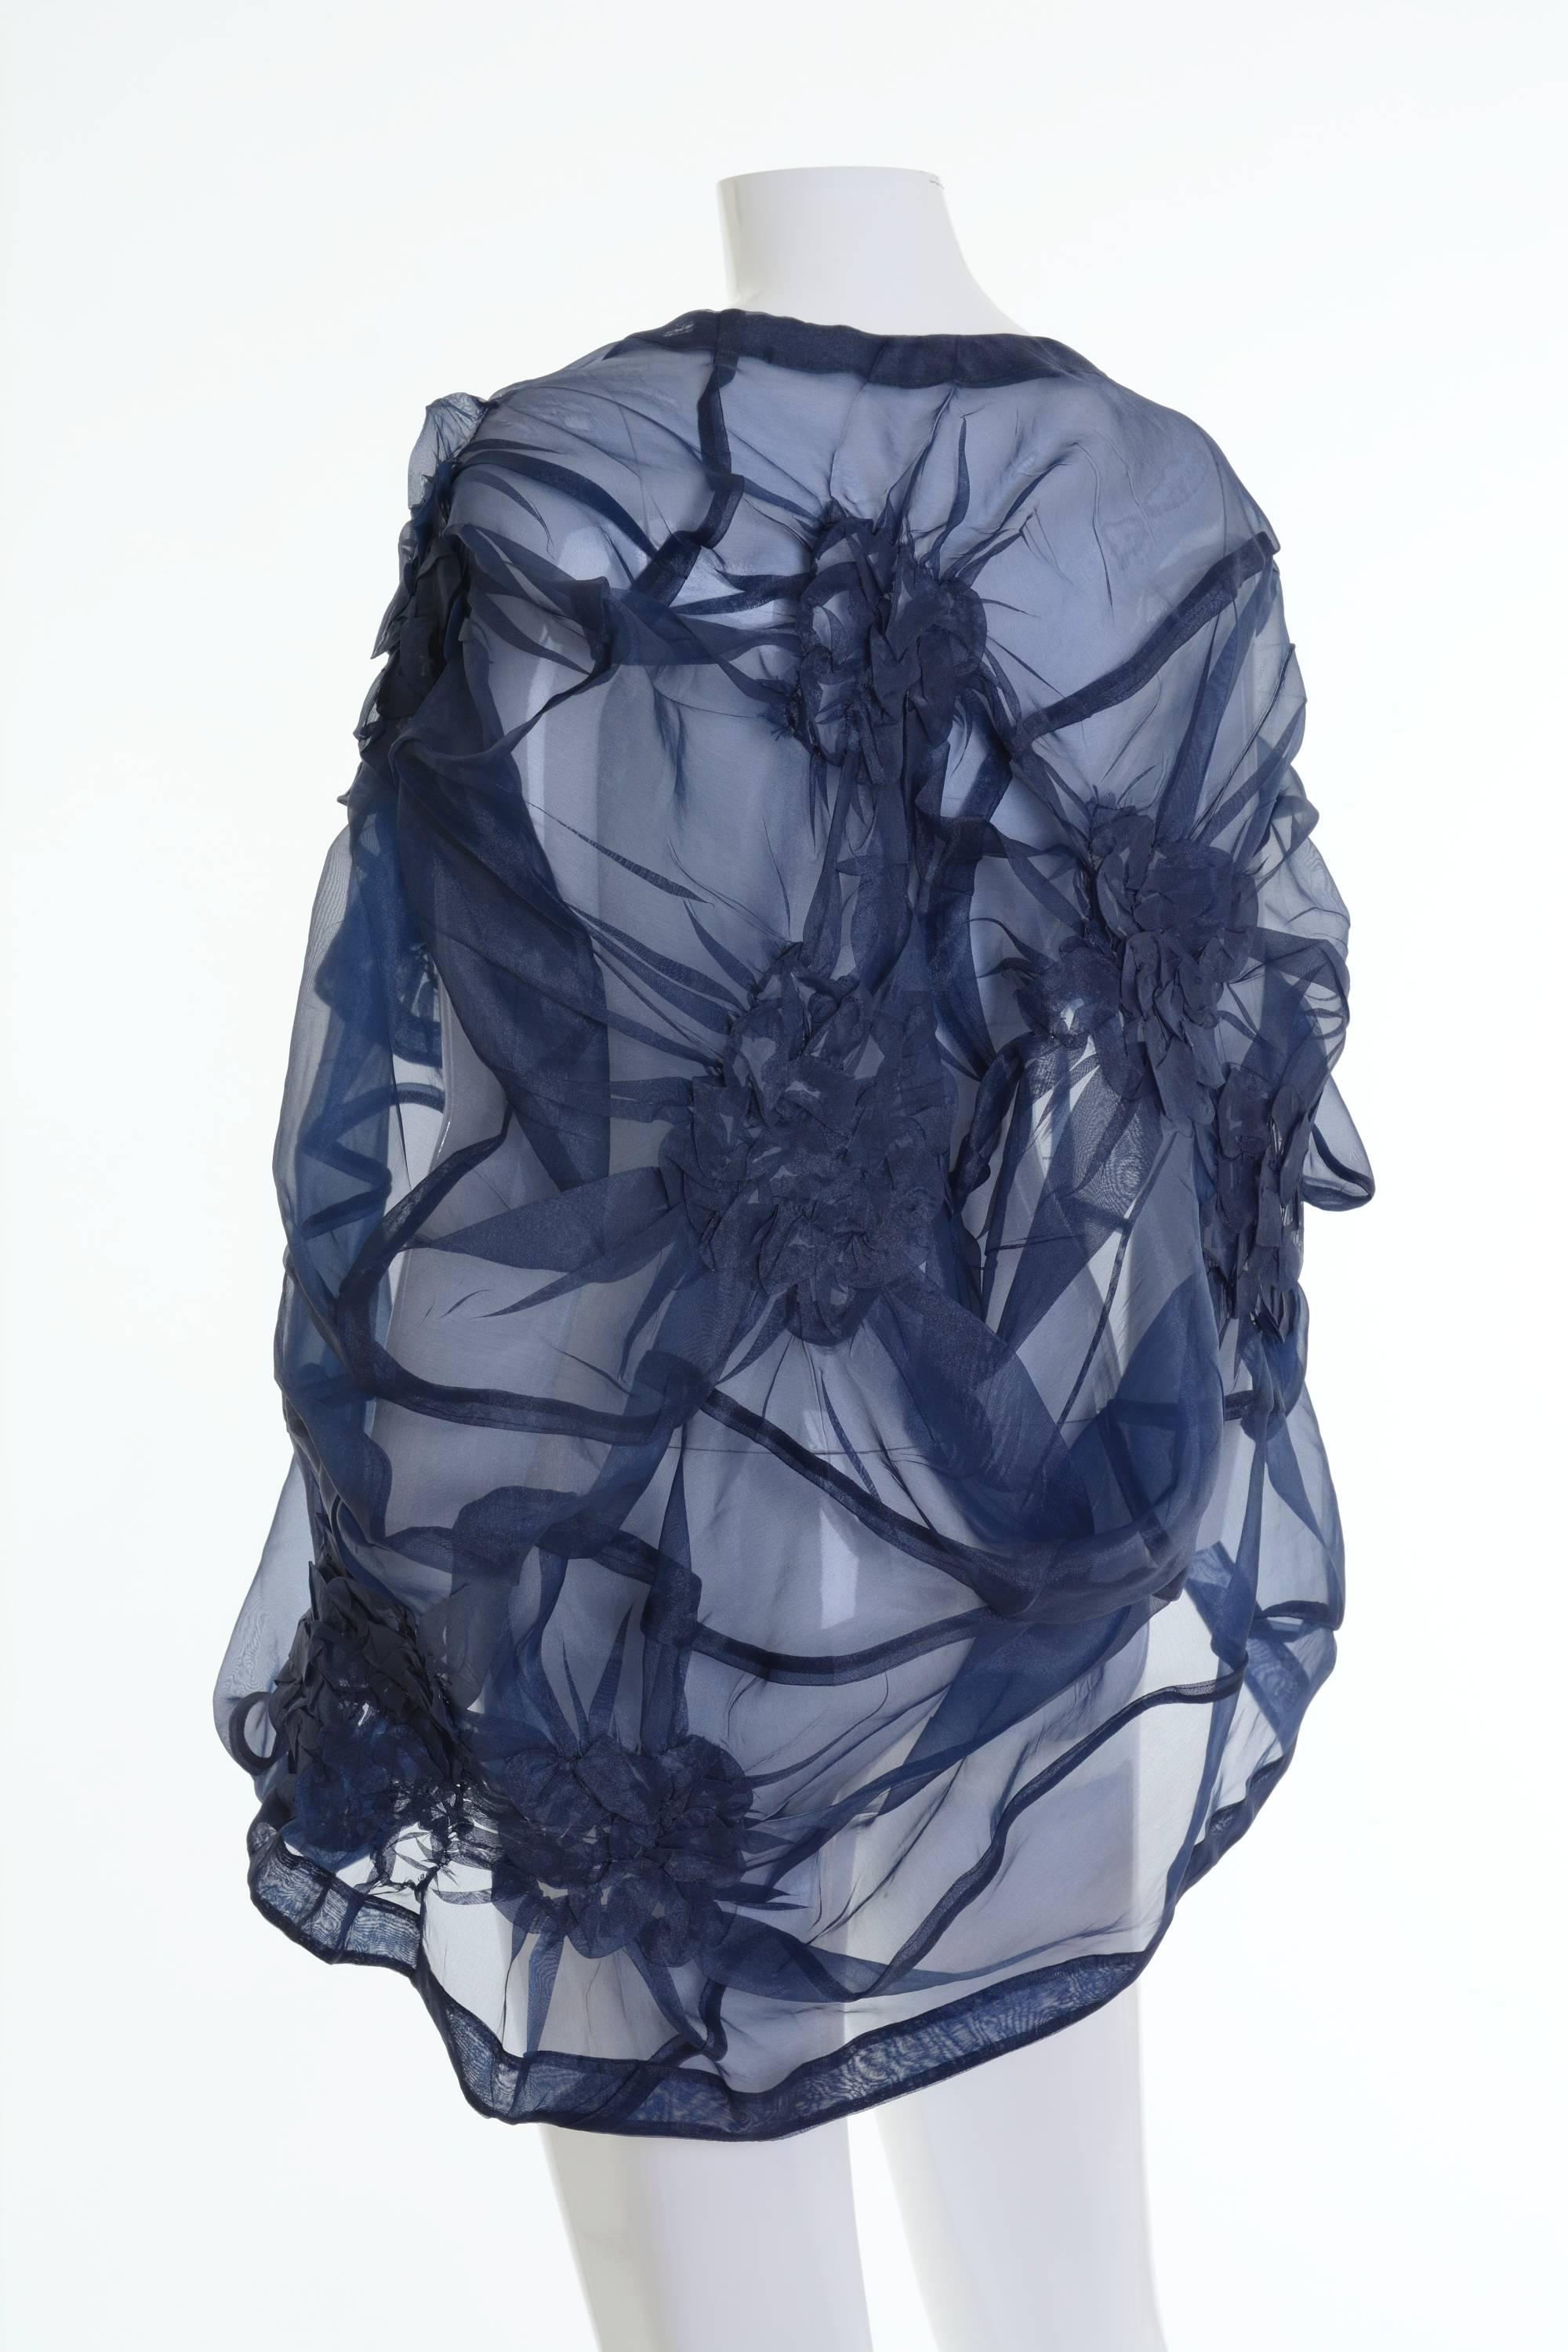 This gorgeous Comme des Garcons cape is in a blue sheer curled and draped fabric. 

Excellent condition 

Label: Comme des Garcons 
Fabric: polyester/nylon
Color: blue

Measurement:
Estimated One Size 
Total length 29 inch